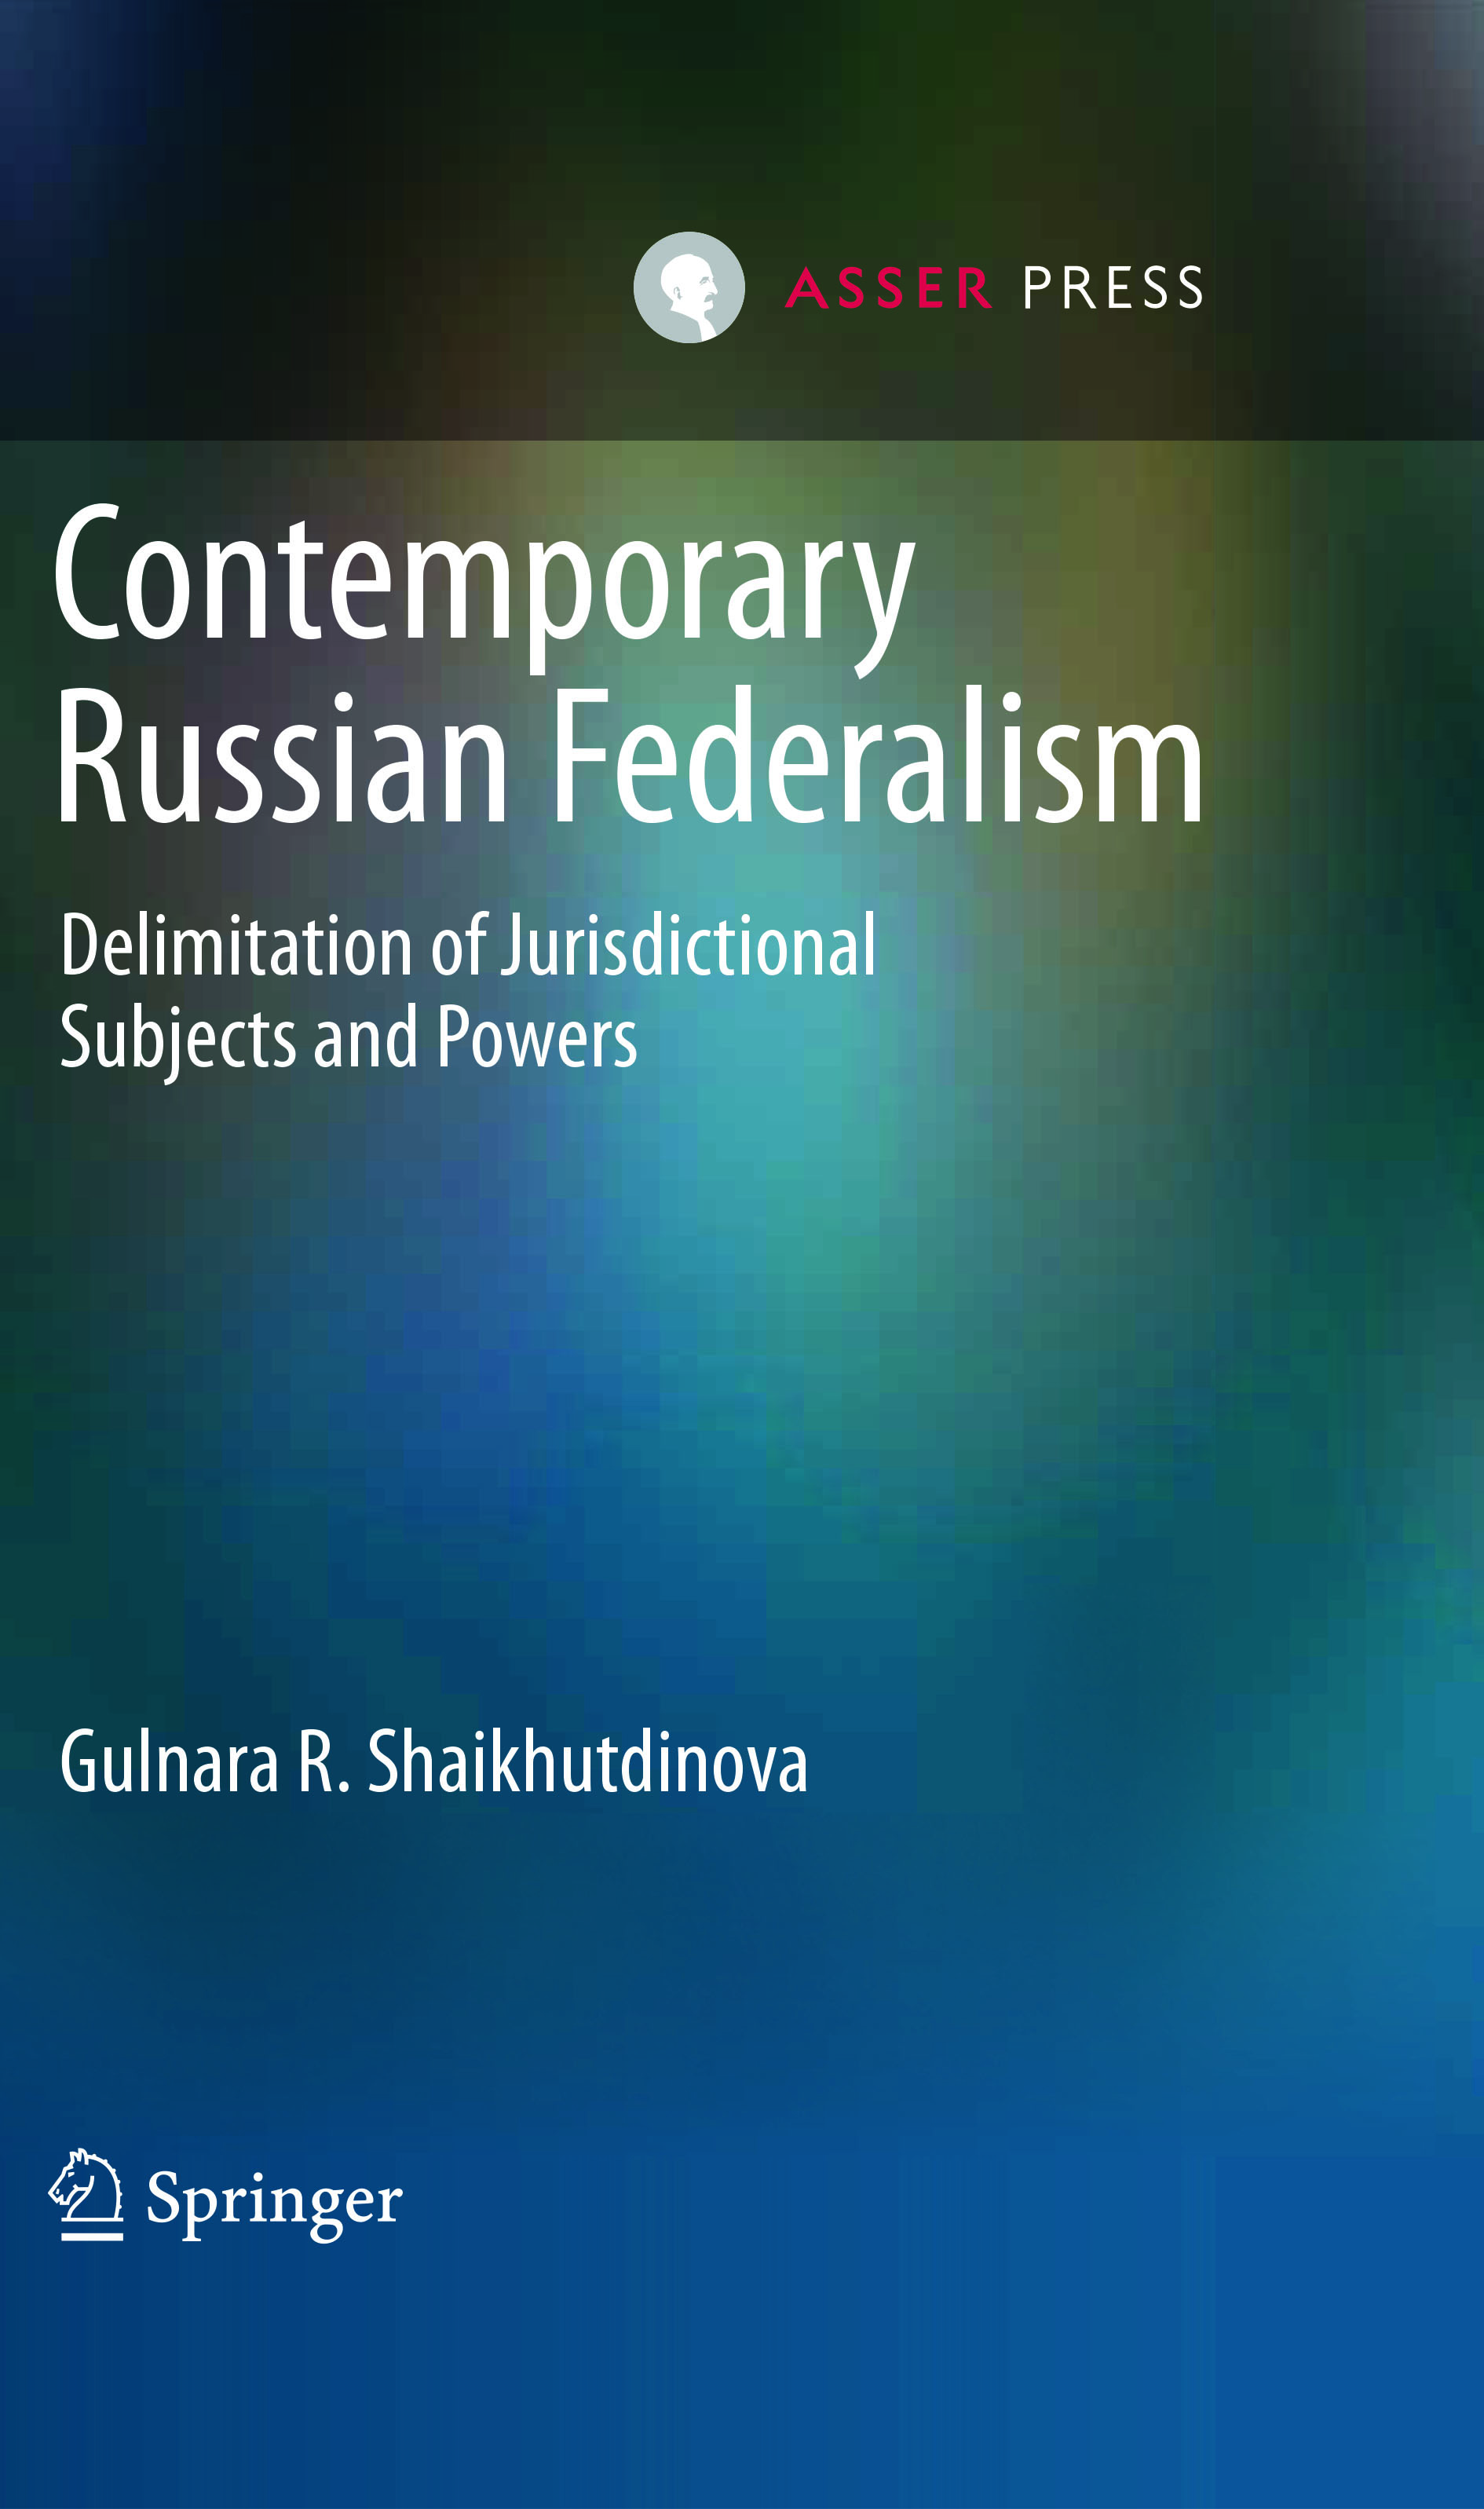 Contemporary Russian Federalism - Delimitation of Jurisdictional Subjects and Powers